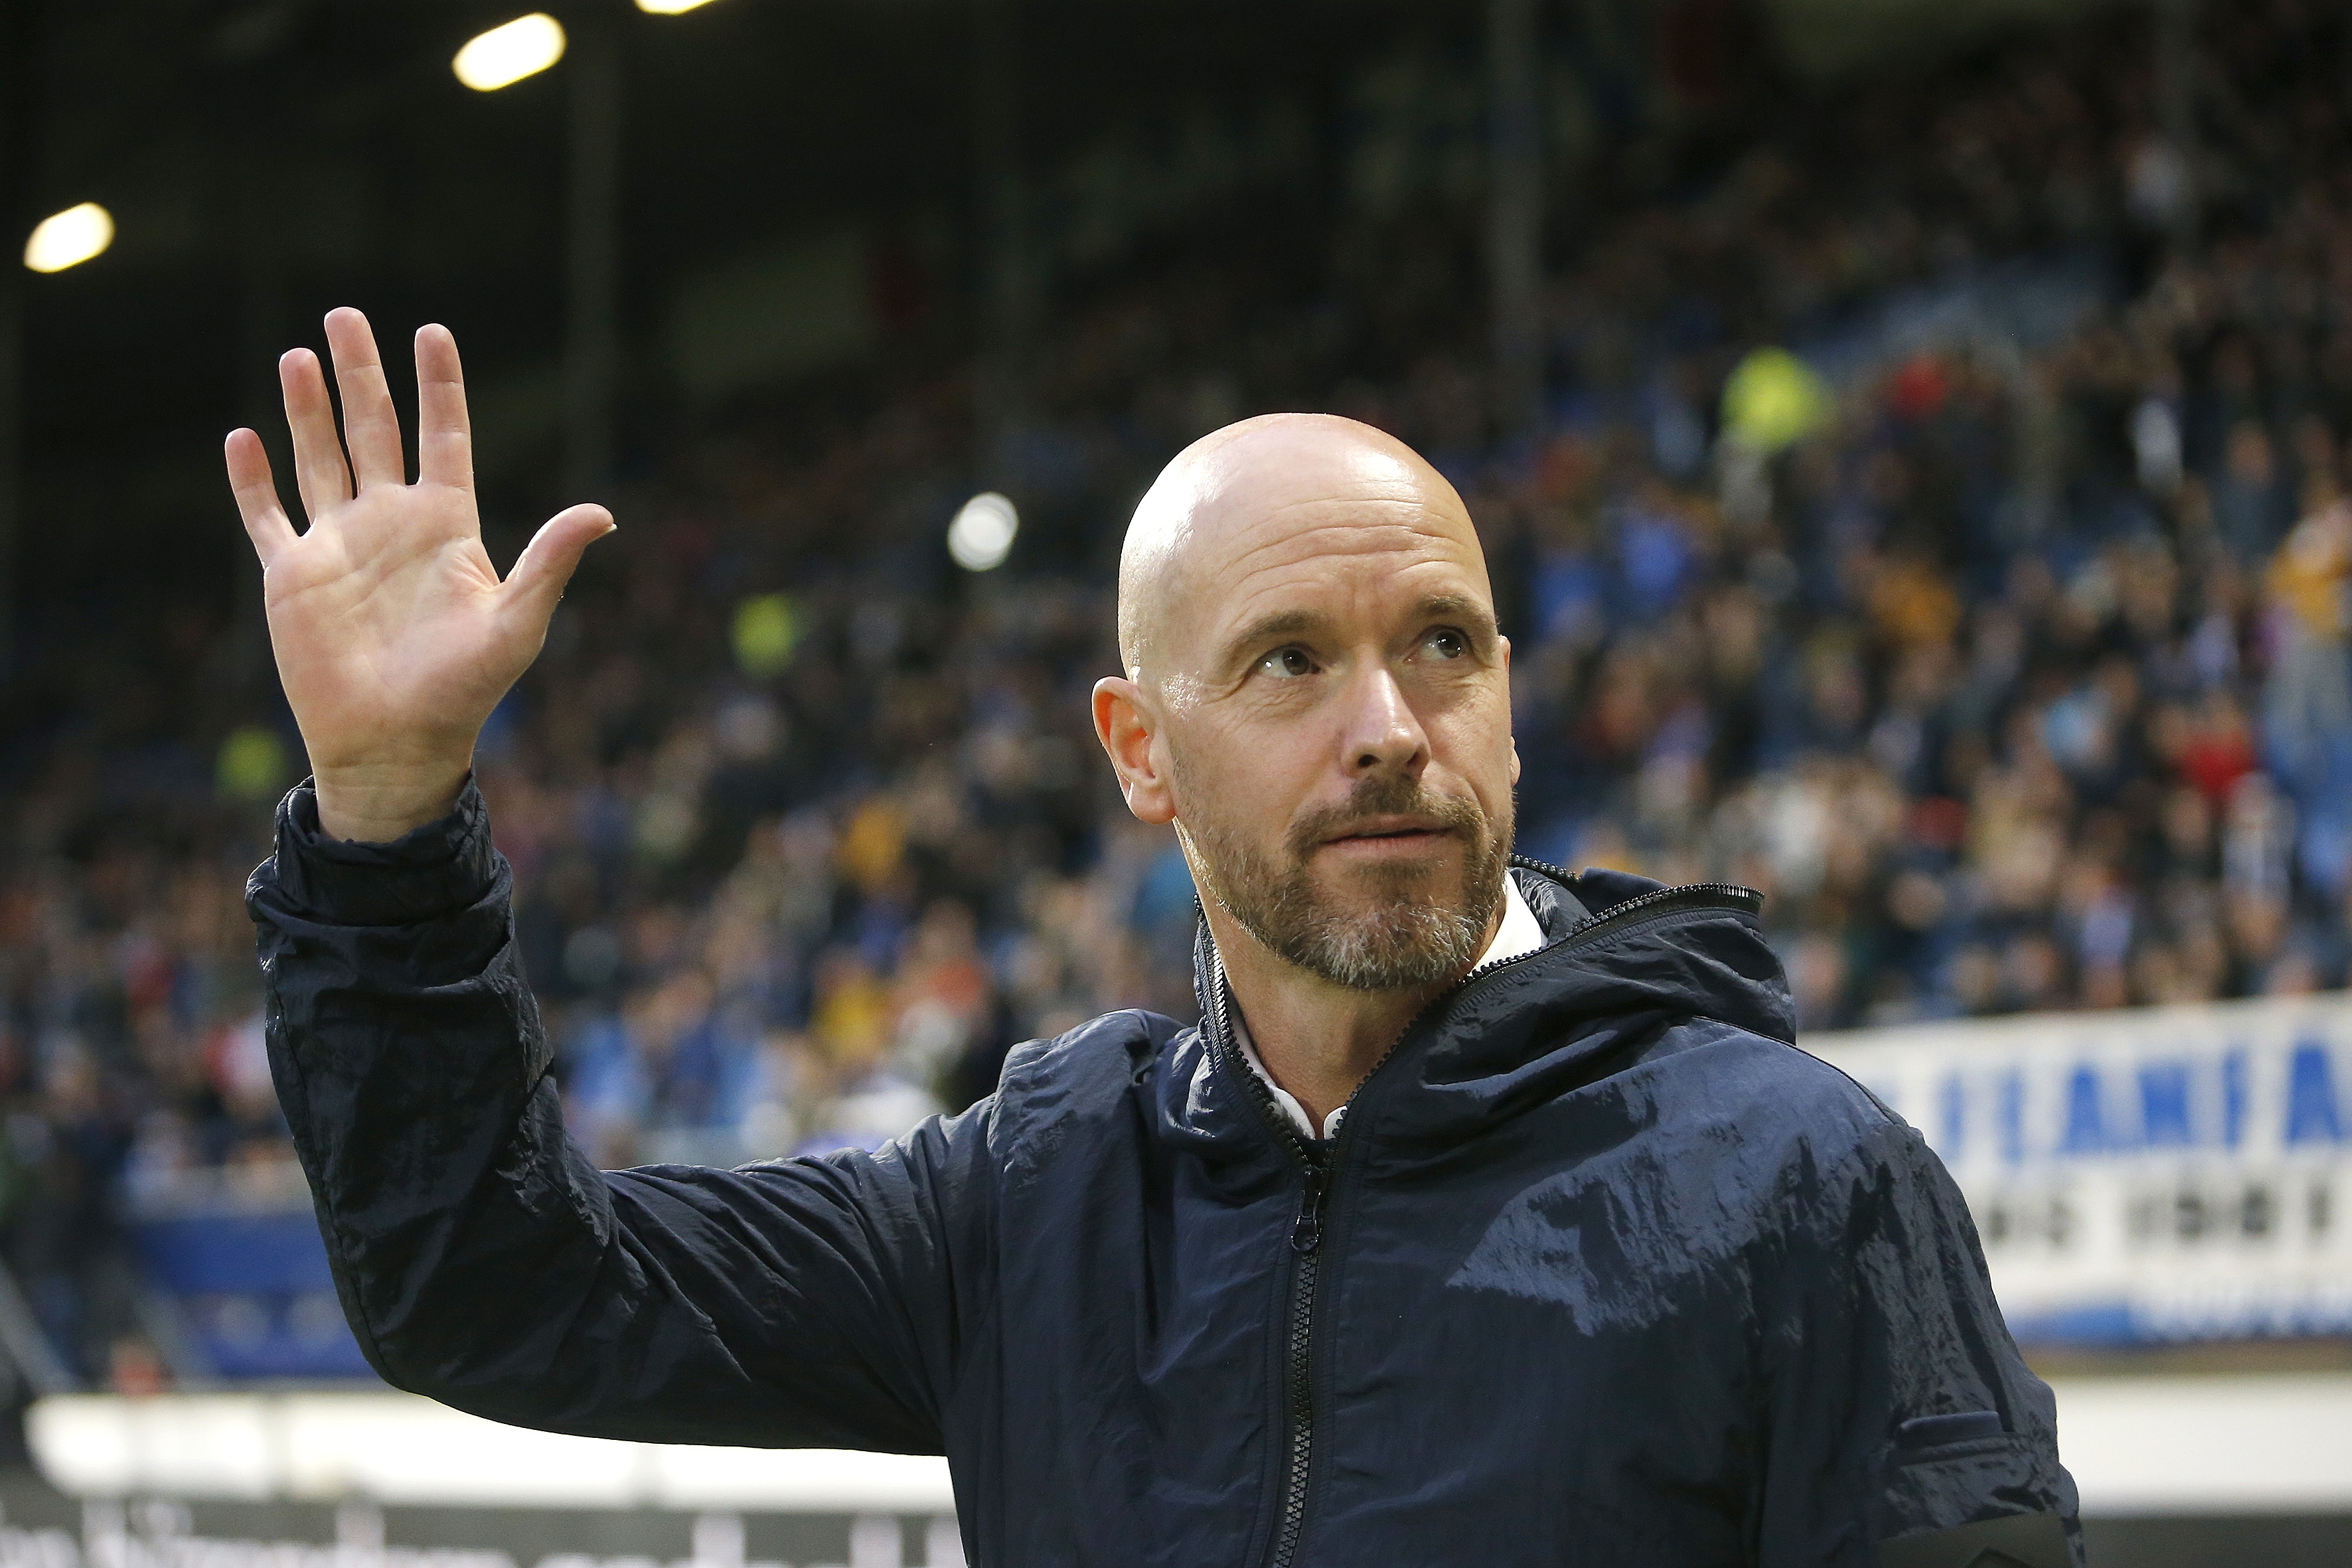 Erik ten Hag will need certain things from Manchester United to help him, admits Jaap Stam